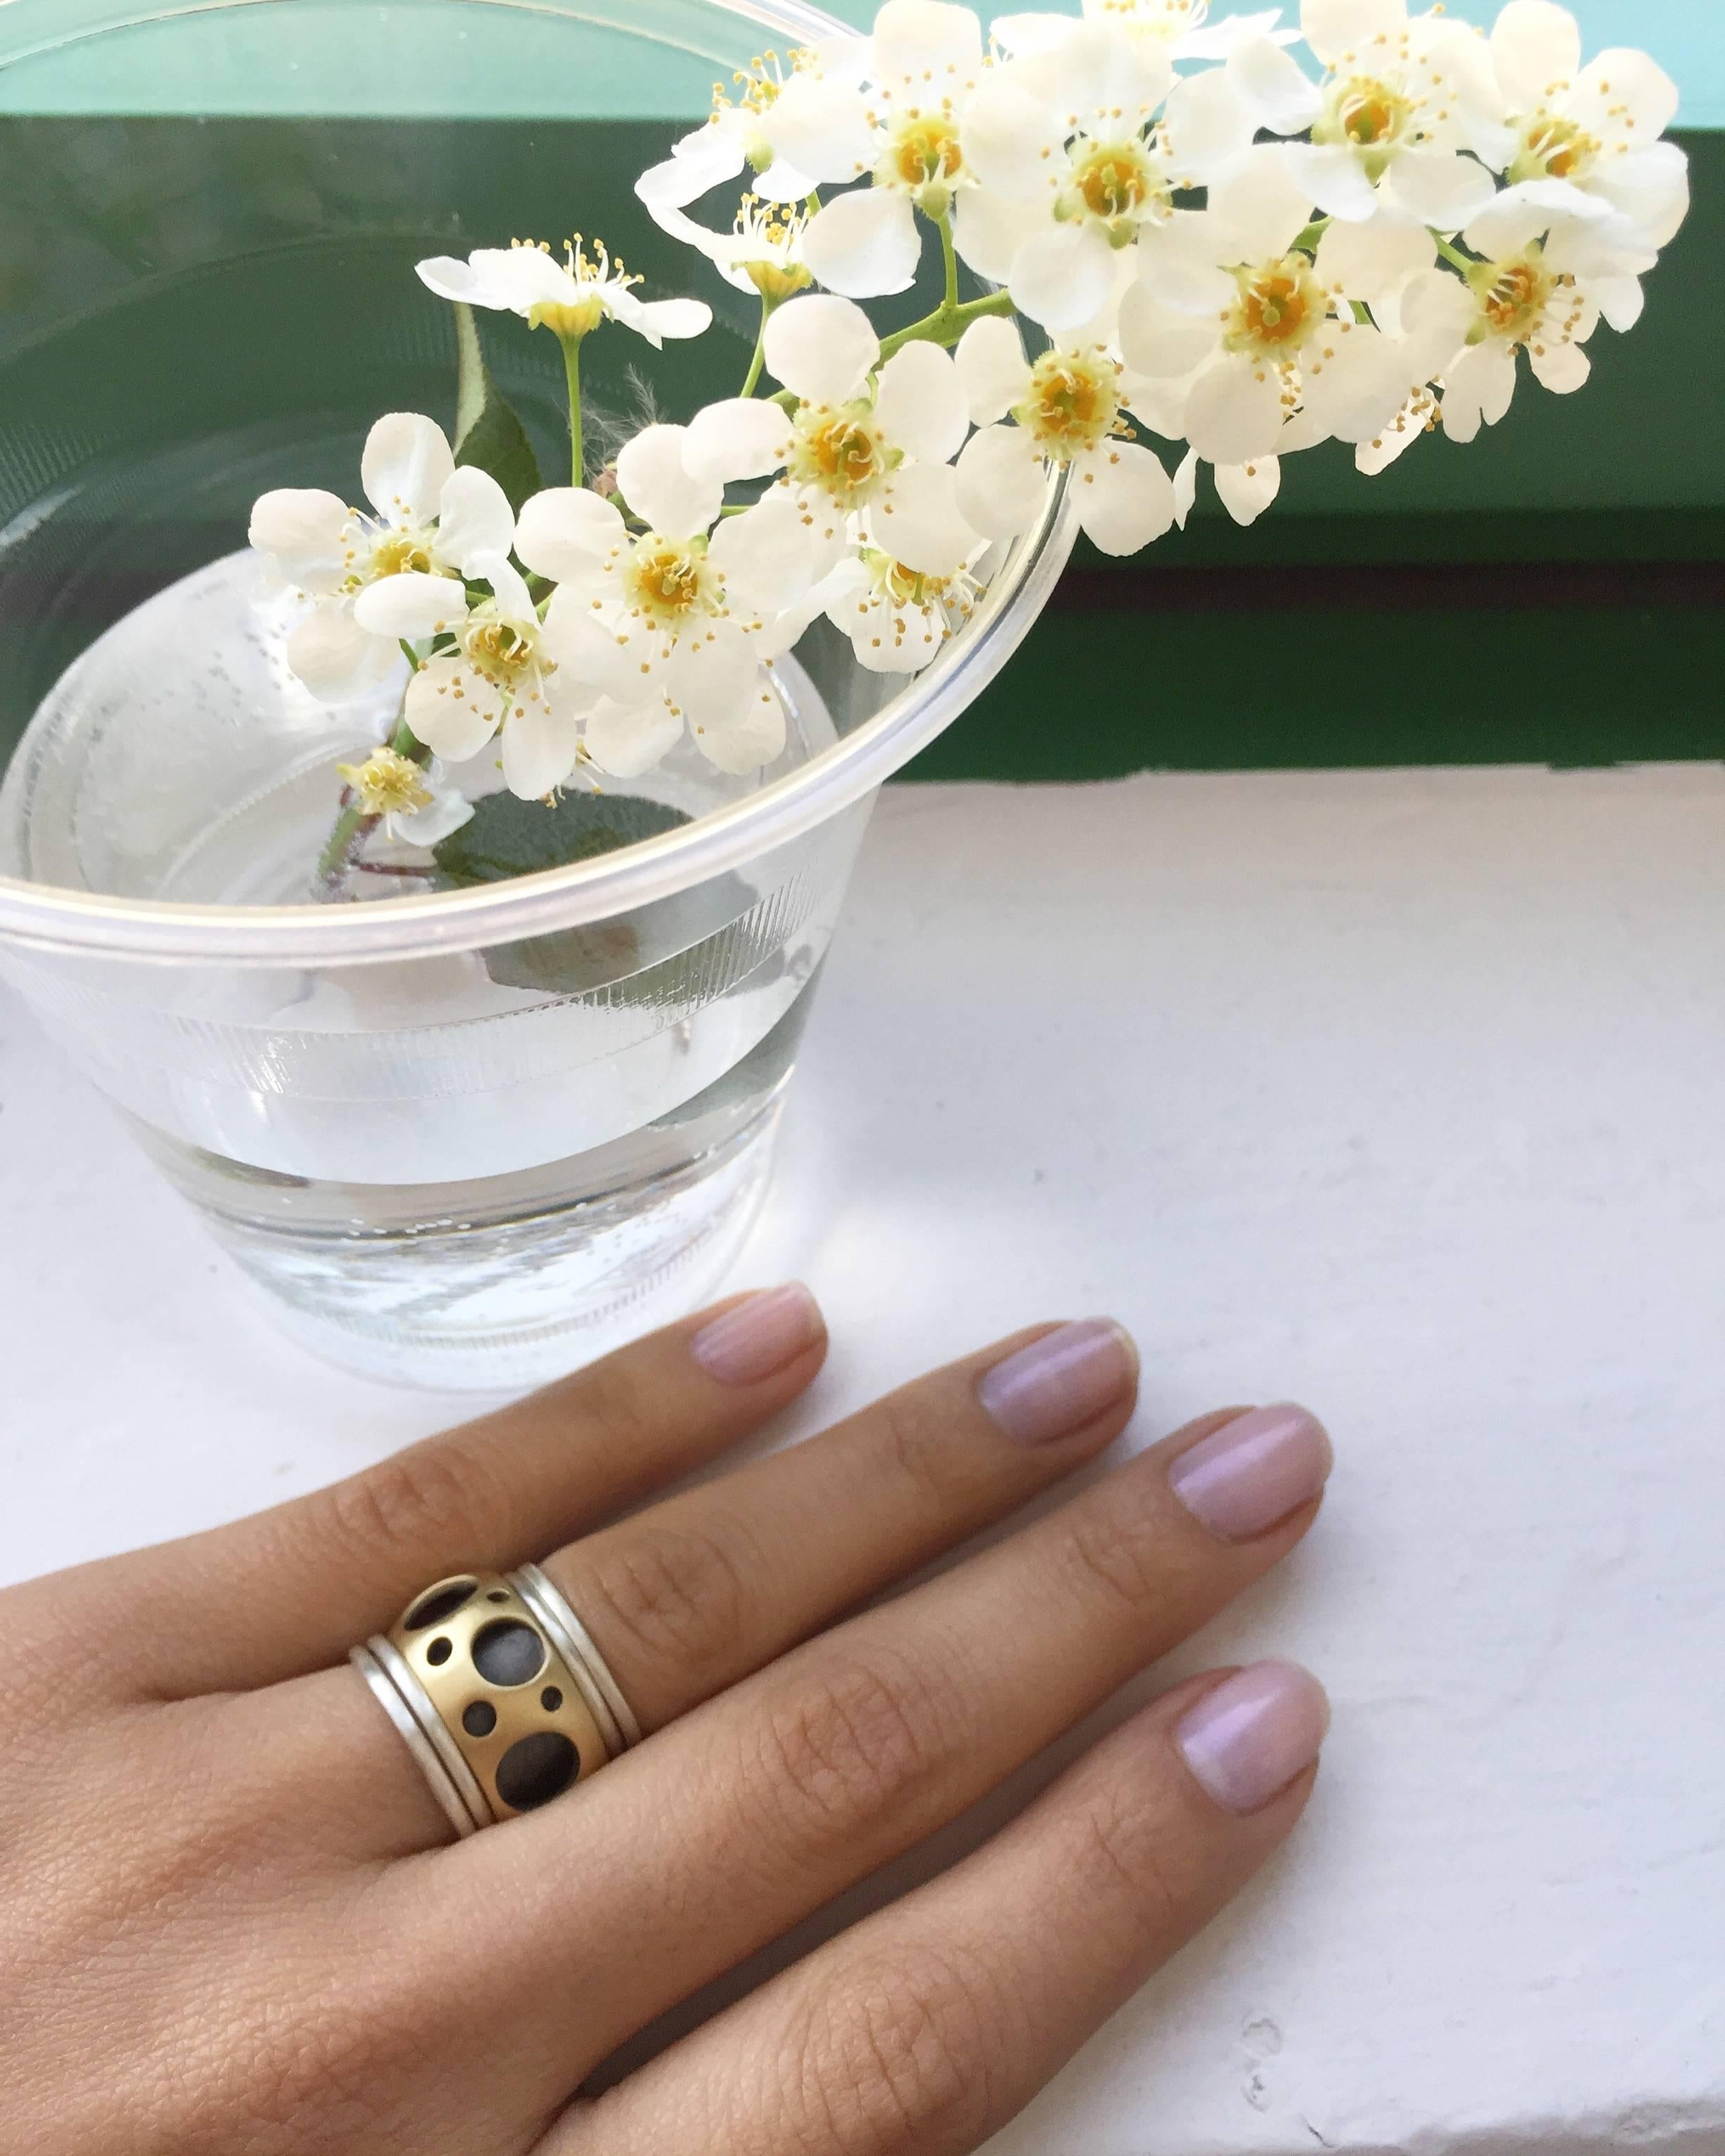 The Hollow Ring is one of Dana's first designs, and it consists of two connected rings. The outer layer of which features diamonds and Dana's signature 